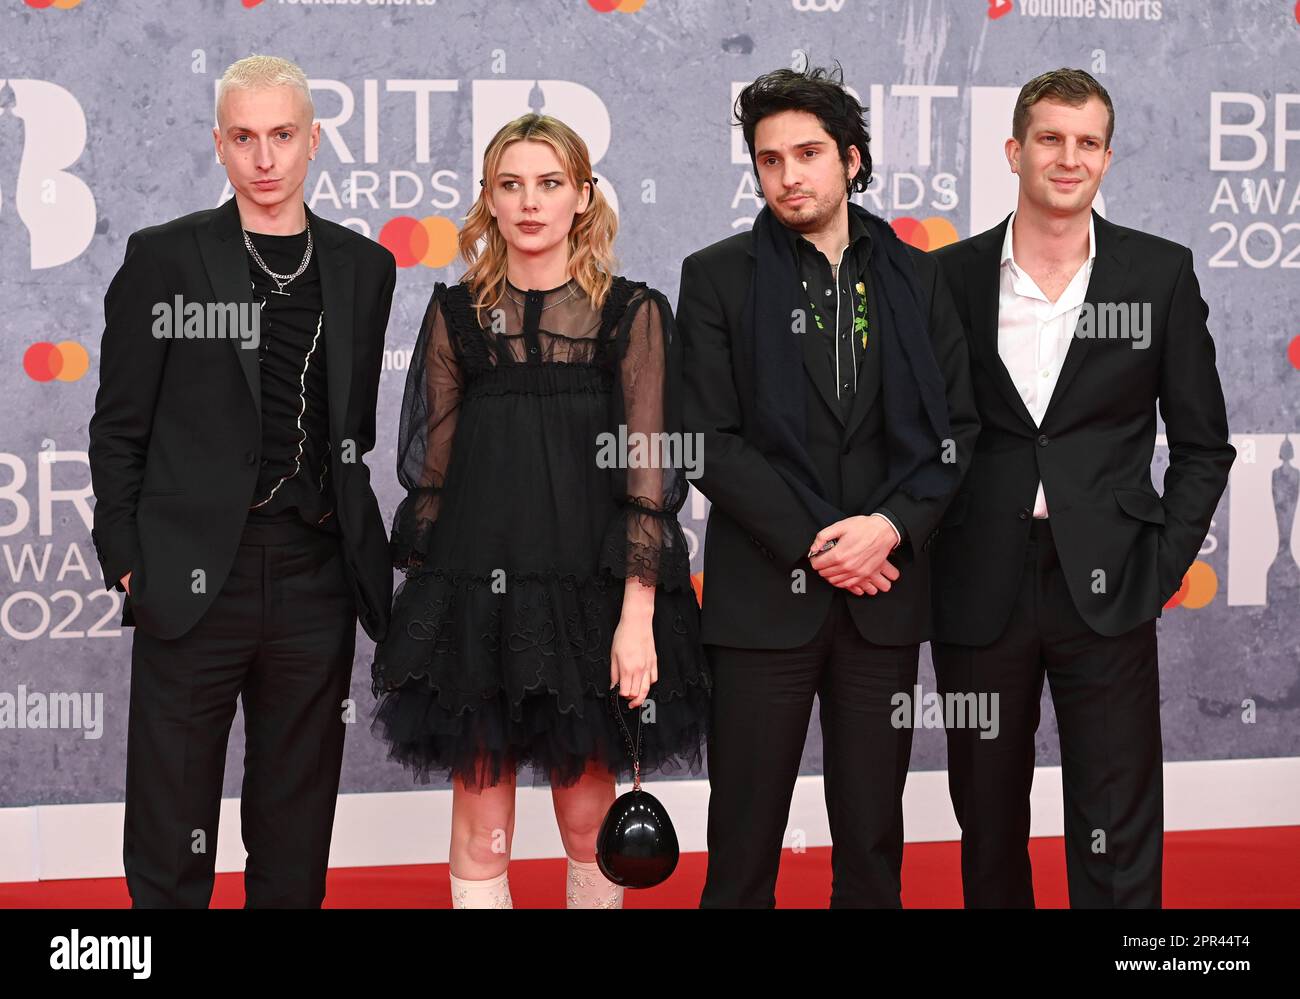 Photo Must Be Credited ©Alpha Press 079965 08/02/2022 Wolf Alice Joff Oddie, Ellie Rowsell, Theo Ellis and Joel Amey at The BRIT Awards 2022 at The O2 Arena in London Stock Photo